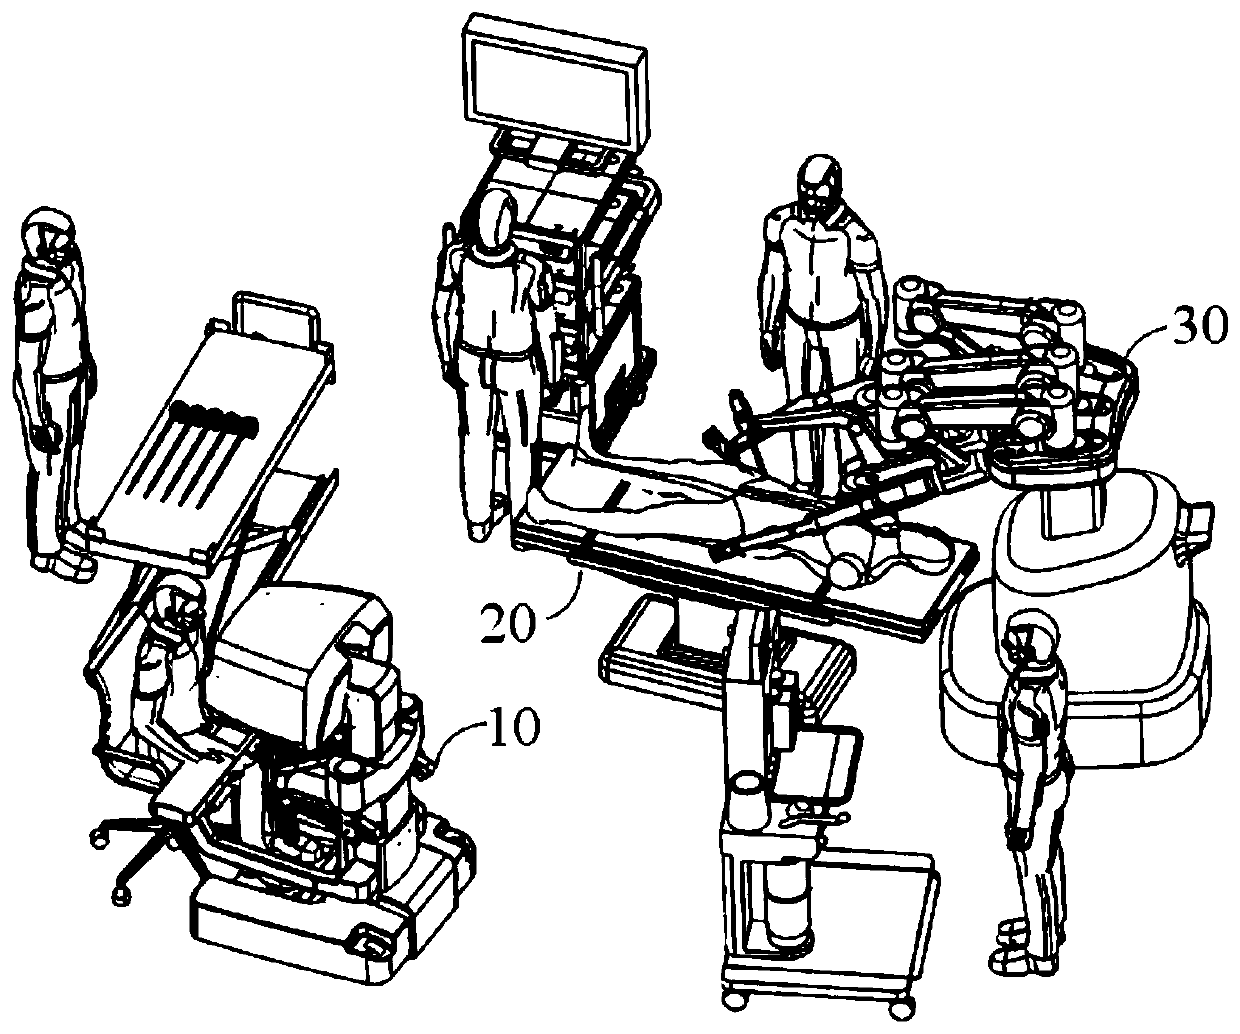 Transmission assembly, driving box, surgical instrument system and robot system